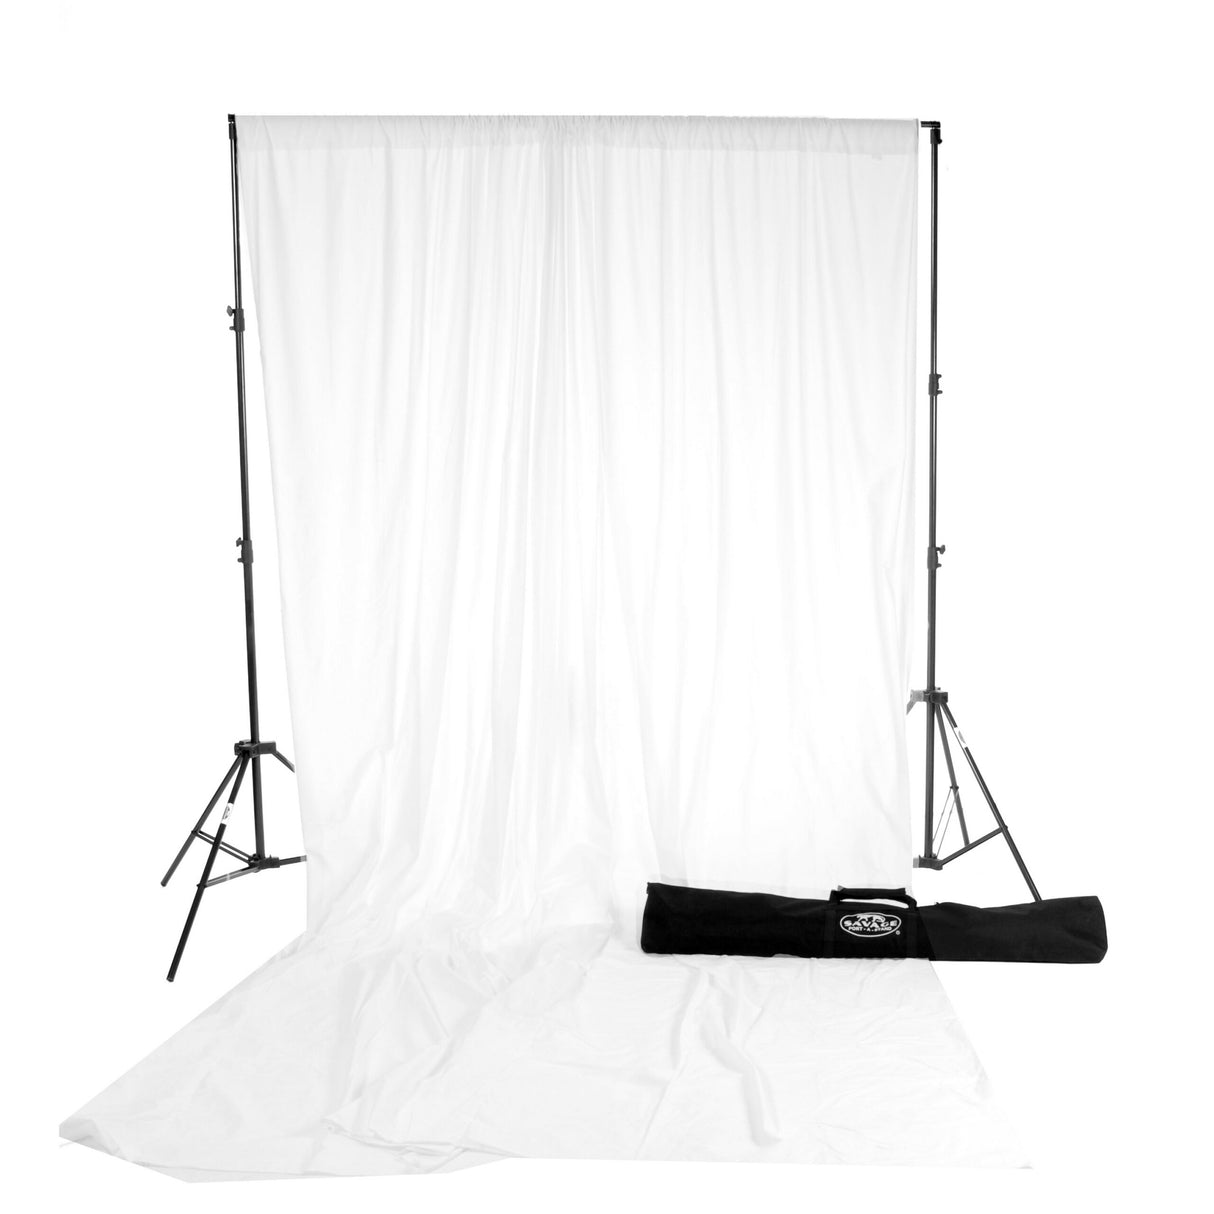 Savage 01PAS-24 10 x 24-Feet Solid Muslin Background Kit with Port-A-Stand, White